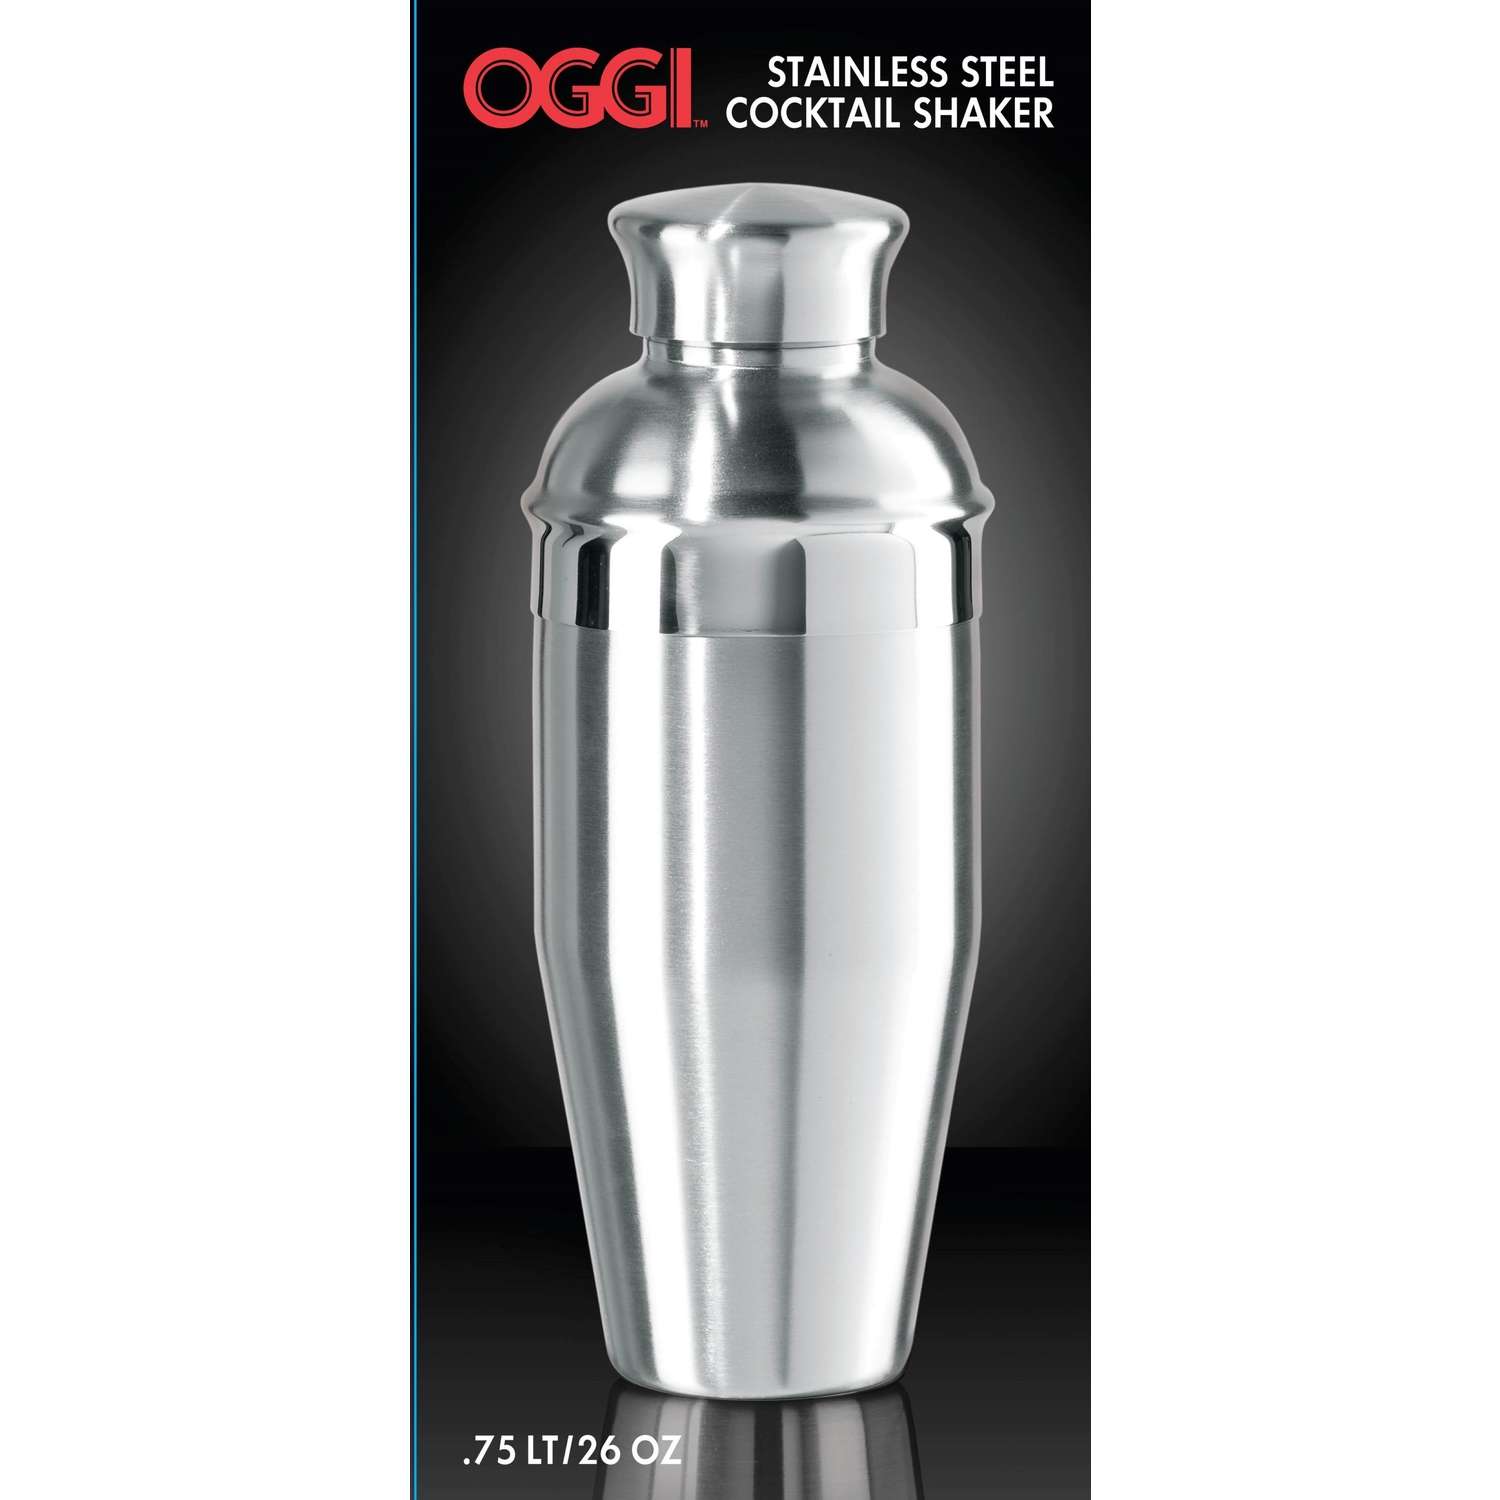 Stainless Steel Spin & Select Cocktail Shaker with Mixed Drink Recipes